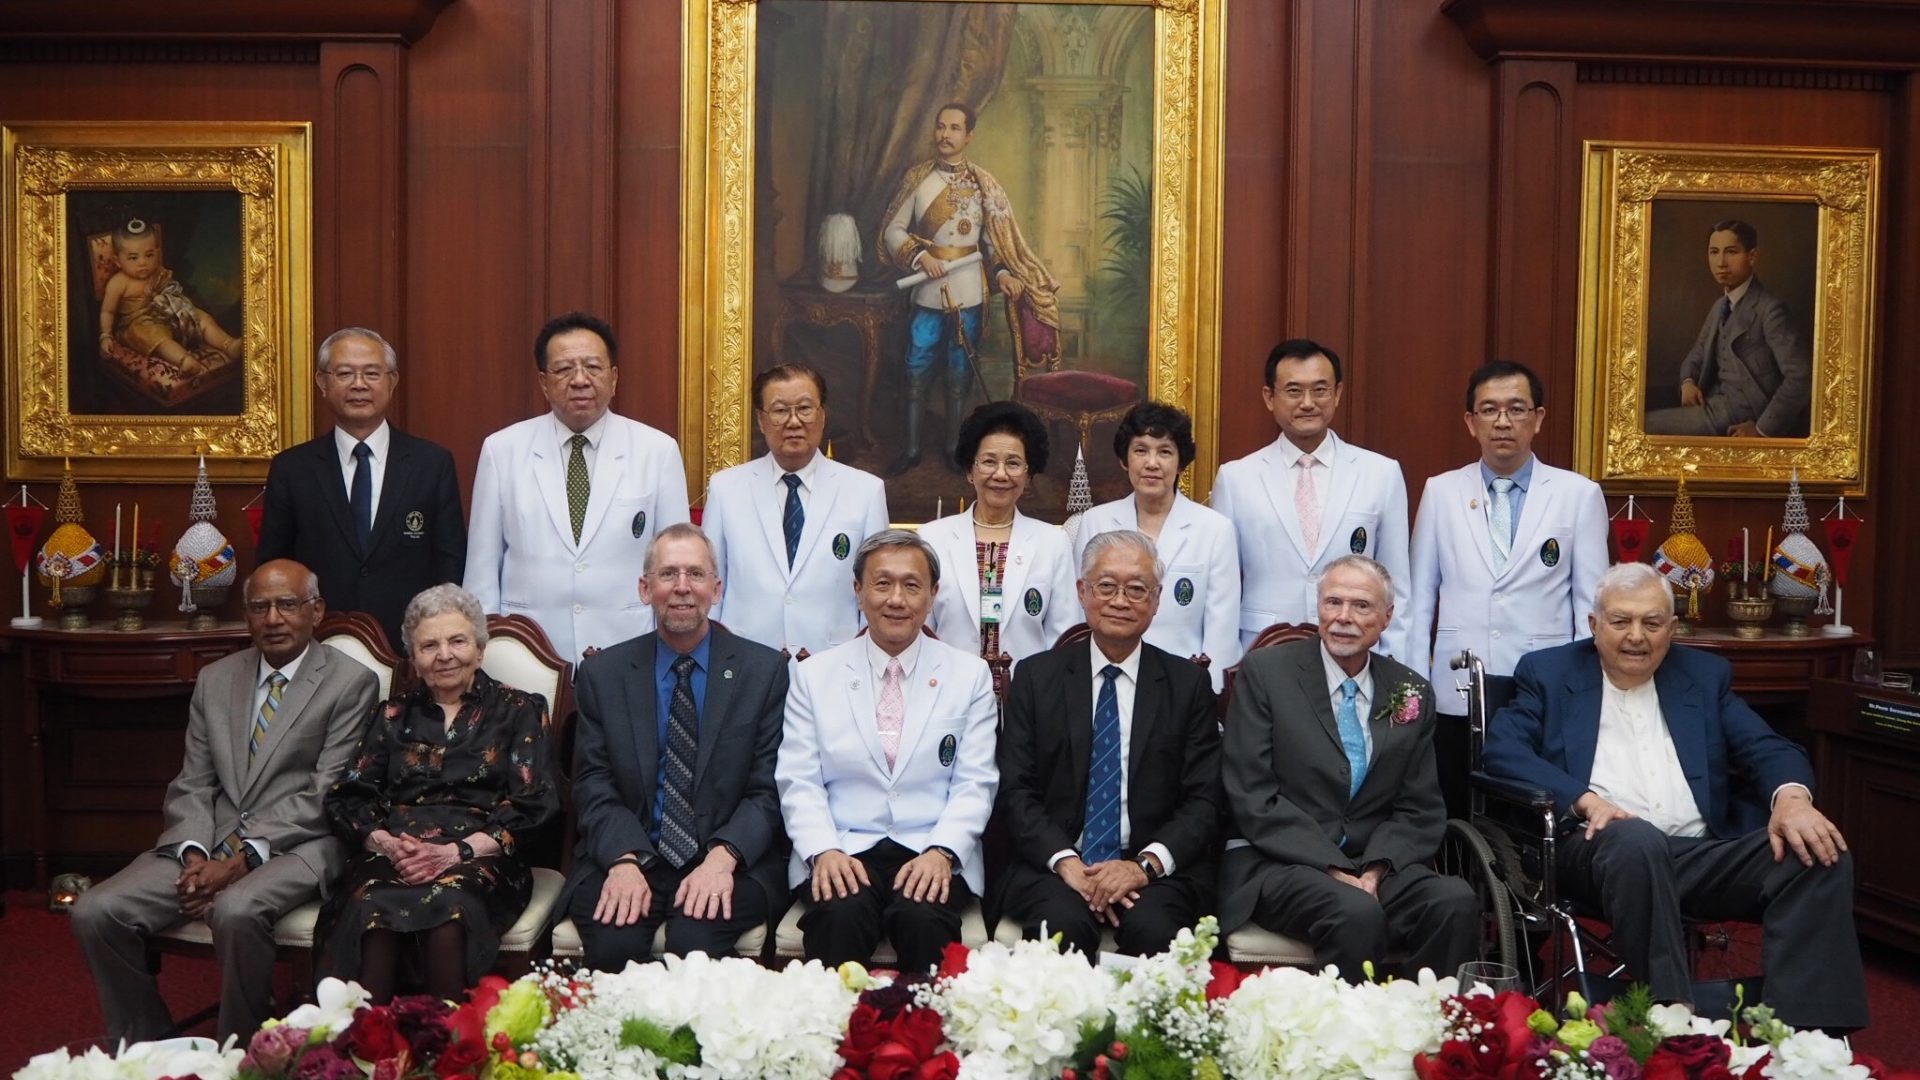 The Prince Mahidol Award Laureates 2017 Delivered Special Lectures at the  Faculty of Medicine Siriraj Hospital on Their Contributions to the Benefits of Mankind